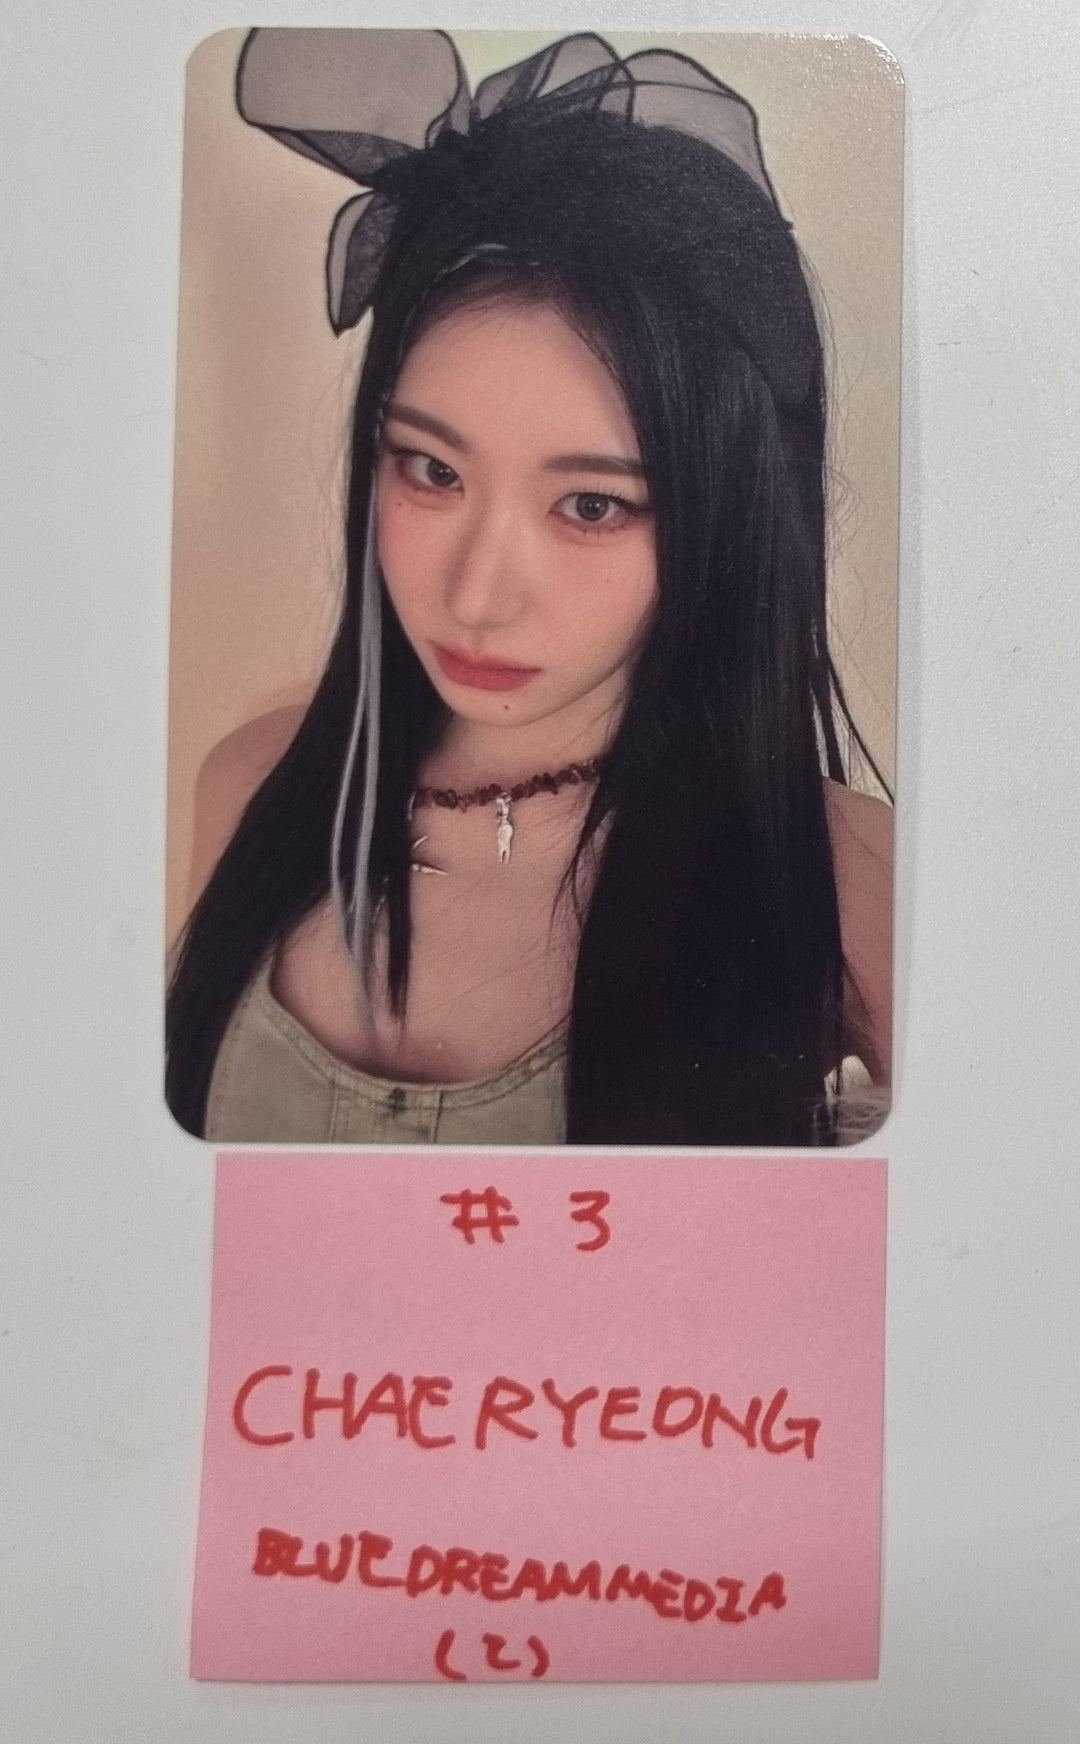 ITZY "BORN TO BE" - Blue Dream Media Shop Pre-Order Benefit Photocard [24.1.11]